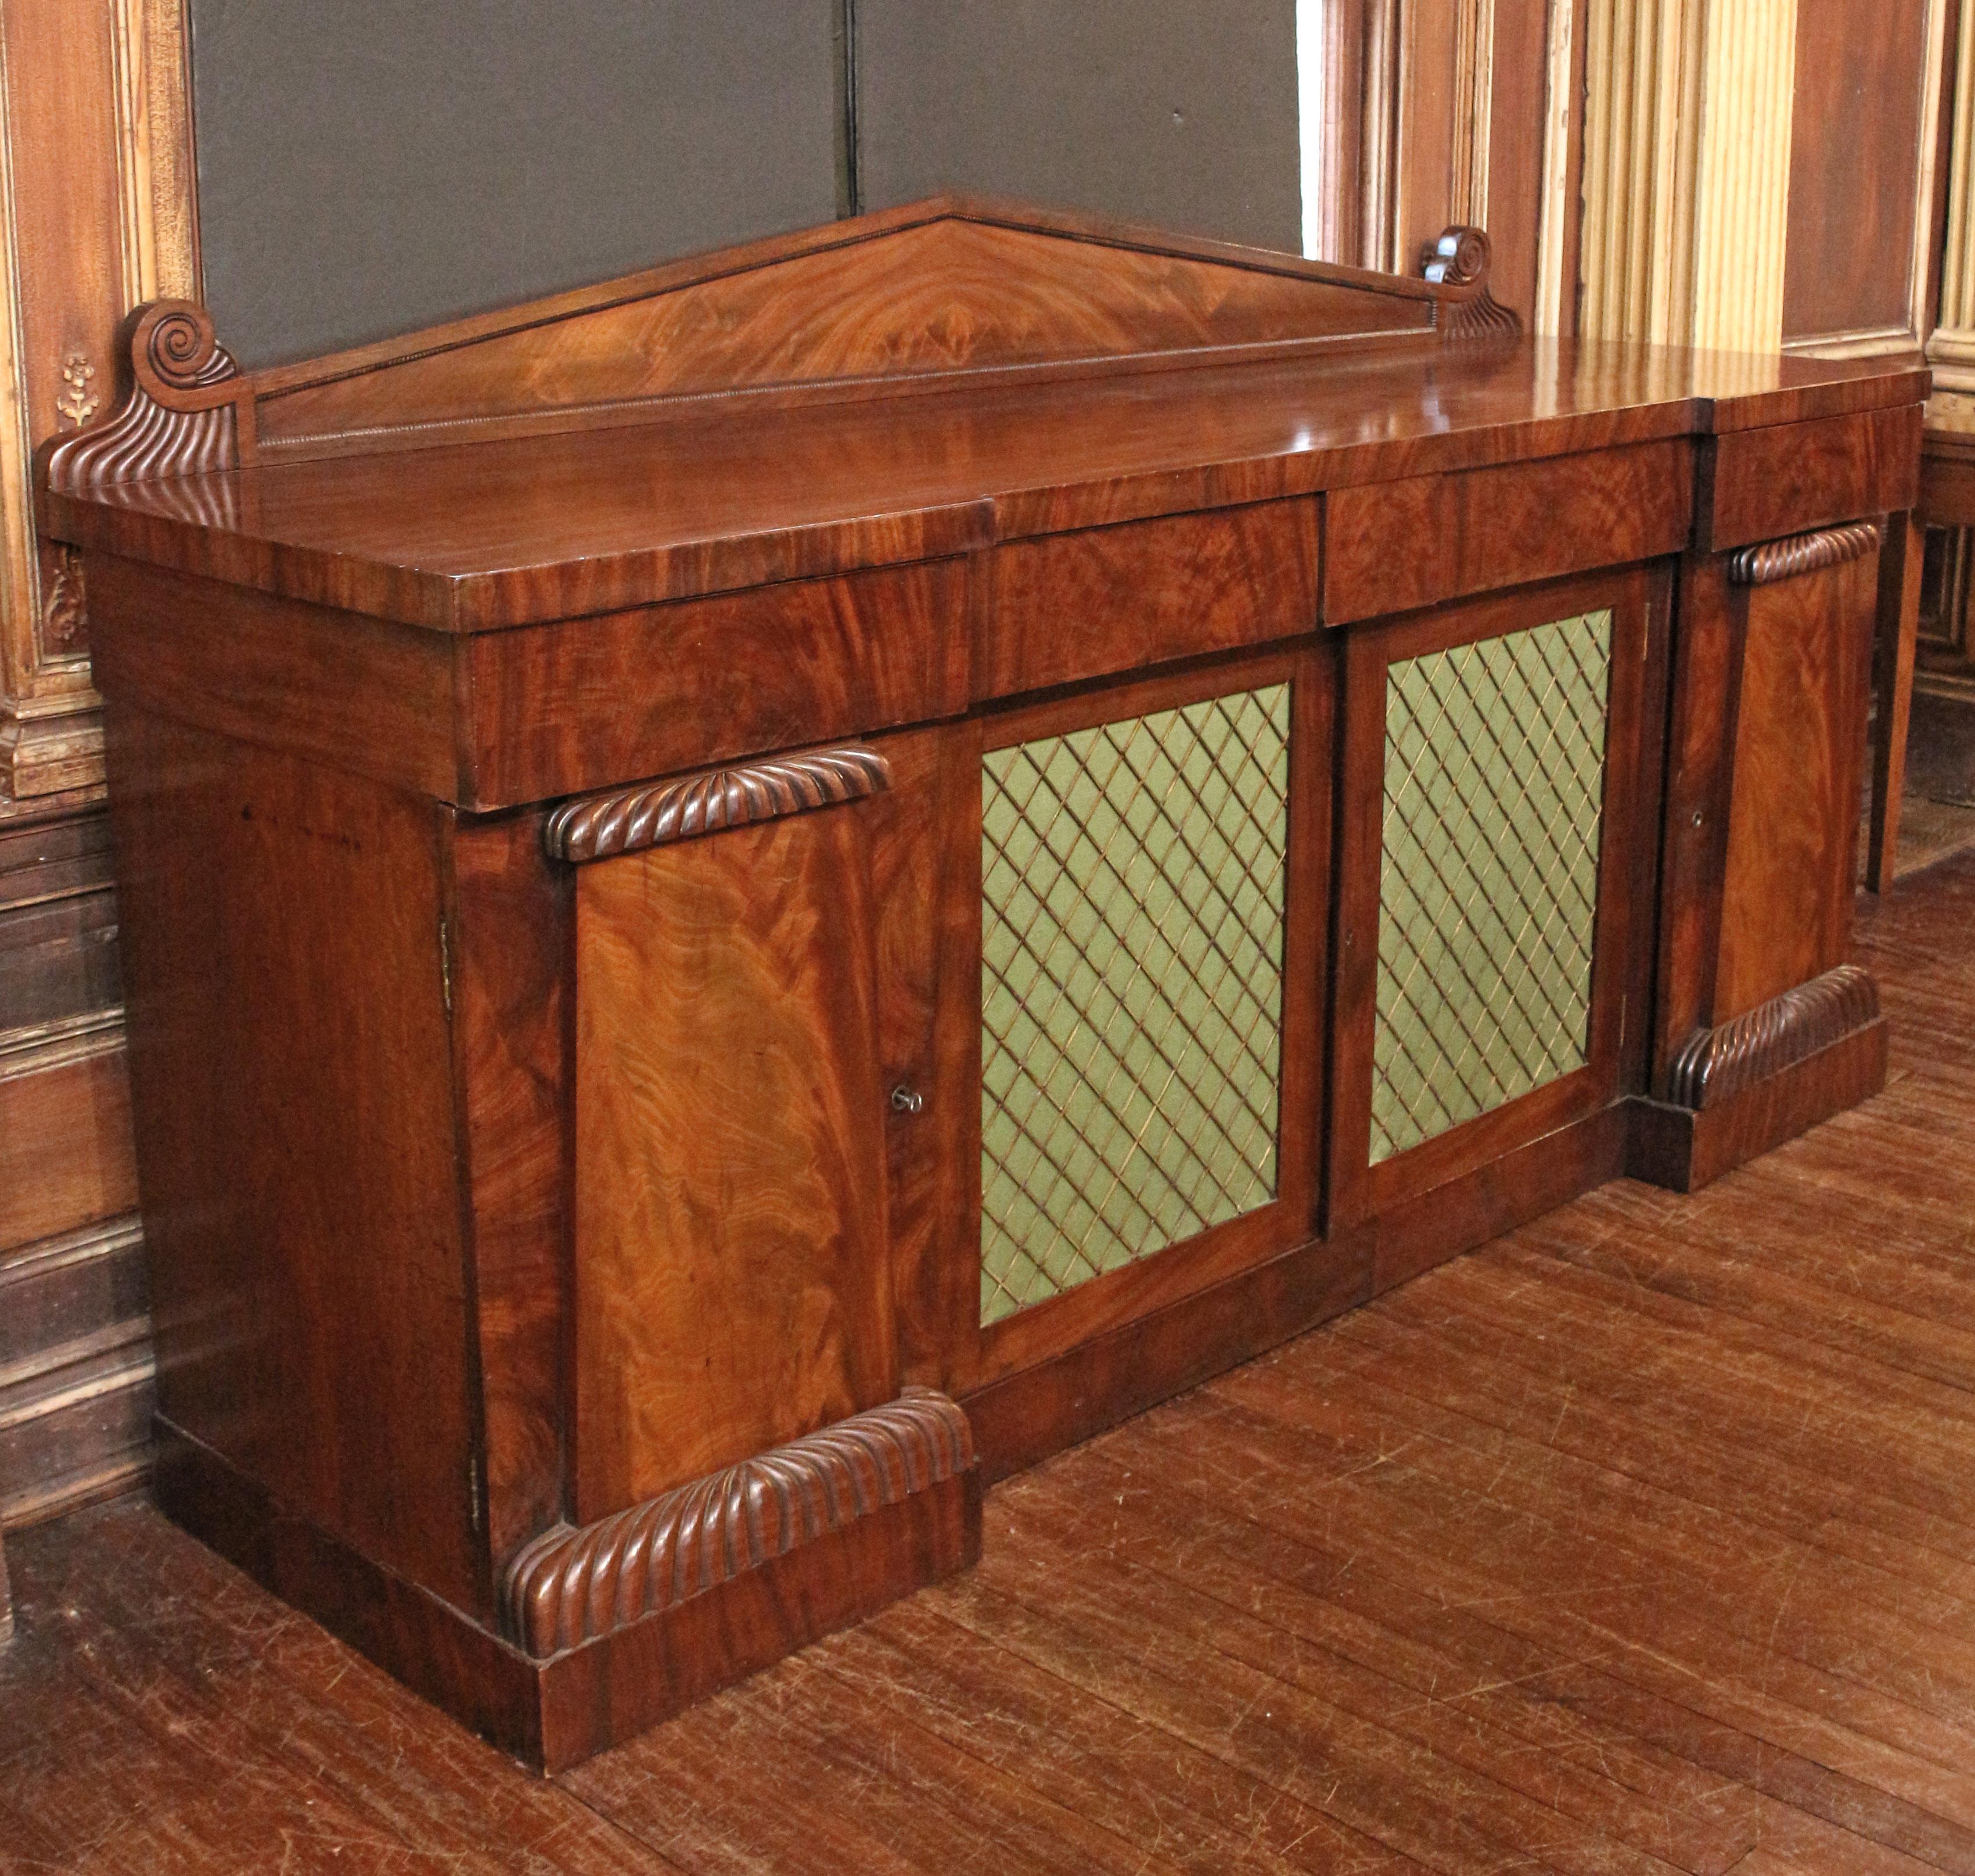 Circa 1830 William IV English Sideboard Serving Cabinet In Good Condition For Sale In Chapel Hill, NC